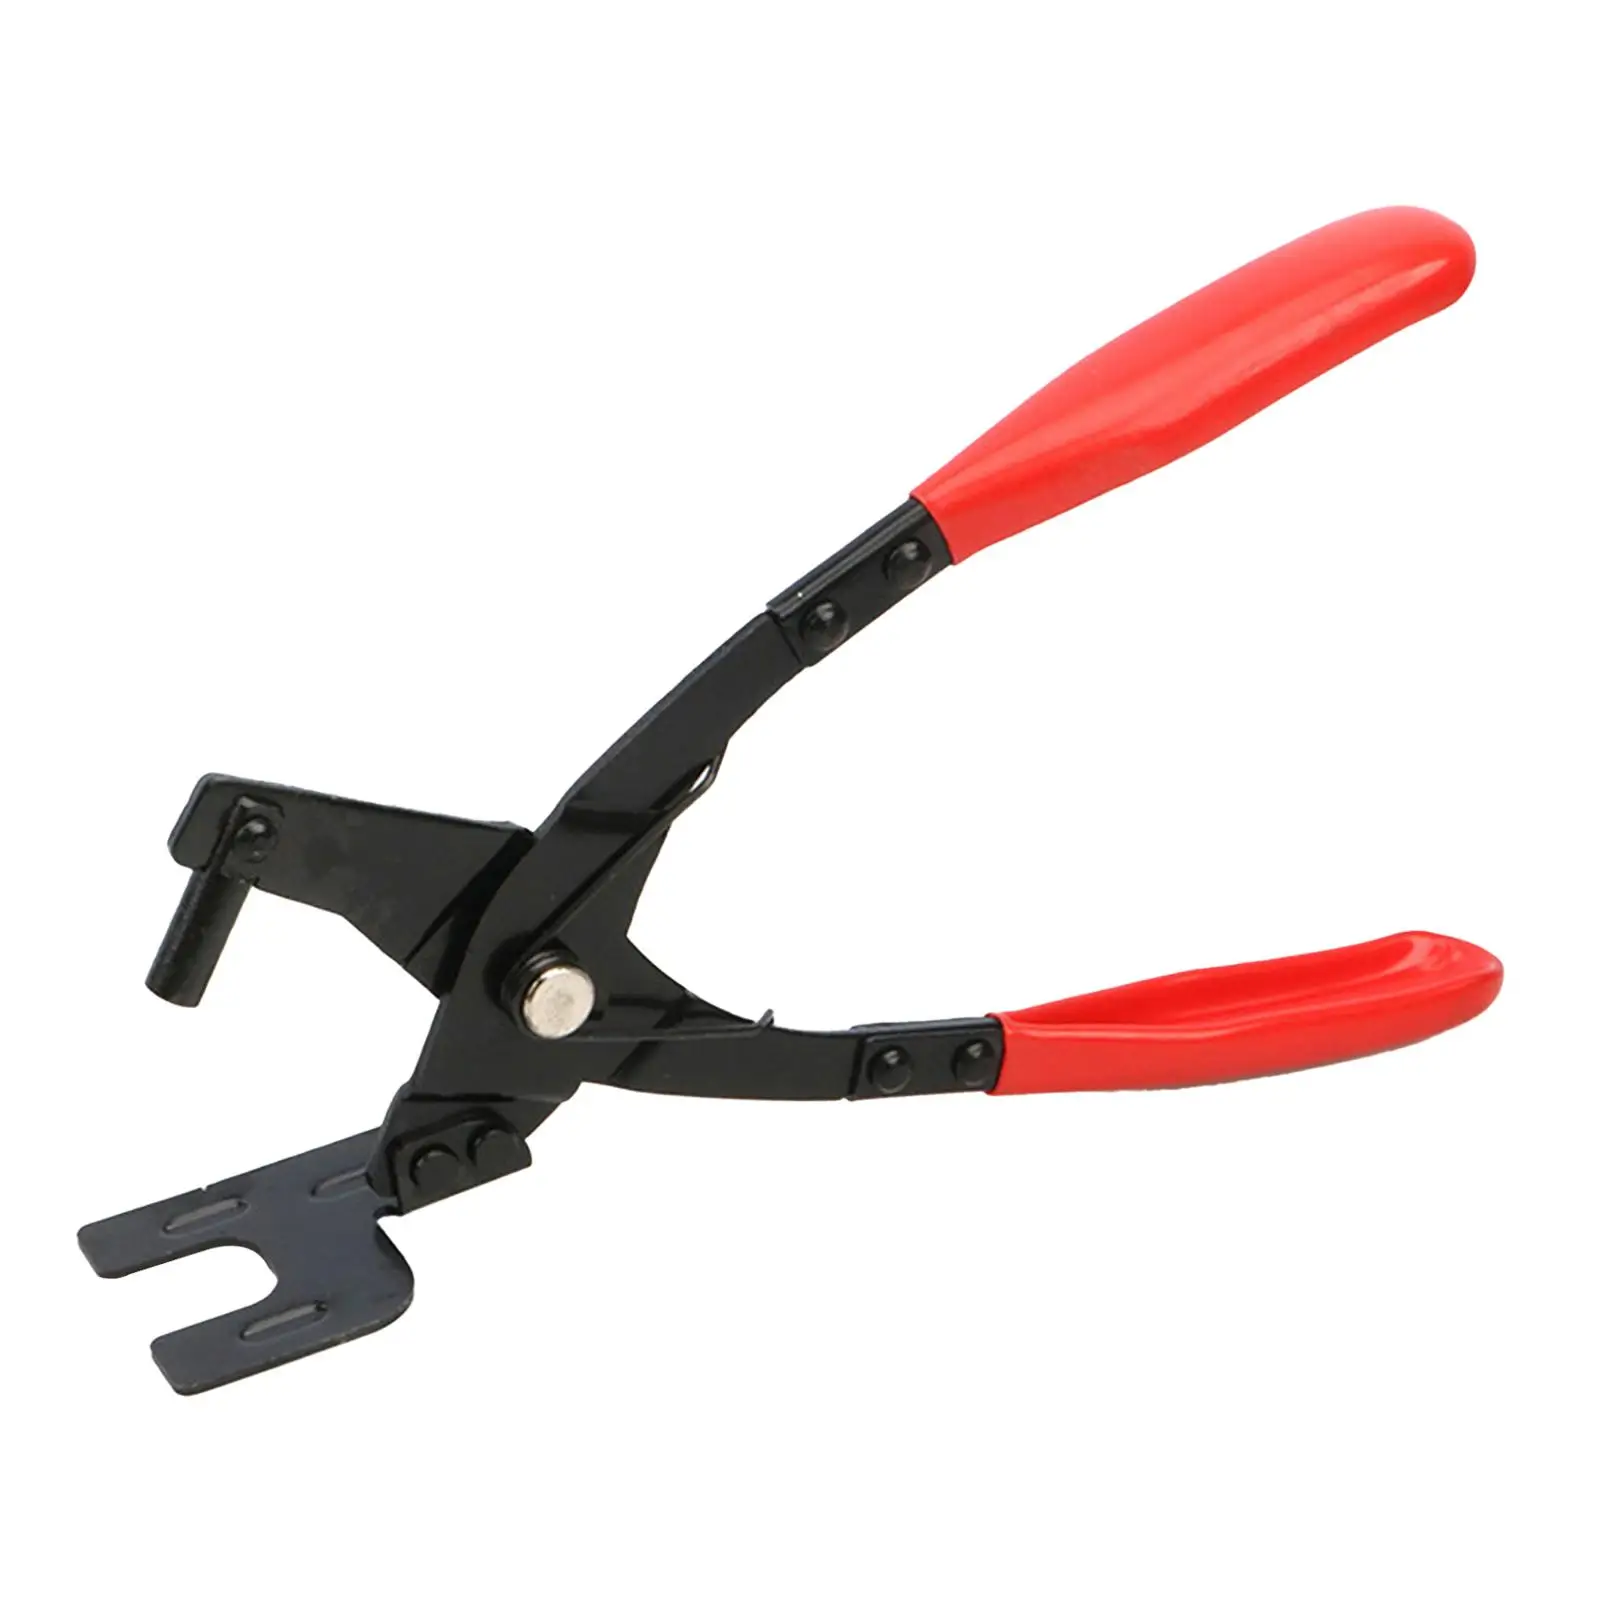 Car Exhaust Hanger Removal Pliers Hand Operated Tools Exhaust Grommet Pulling Pliers Compatible with All Exhaust Rubber Hangers